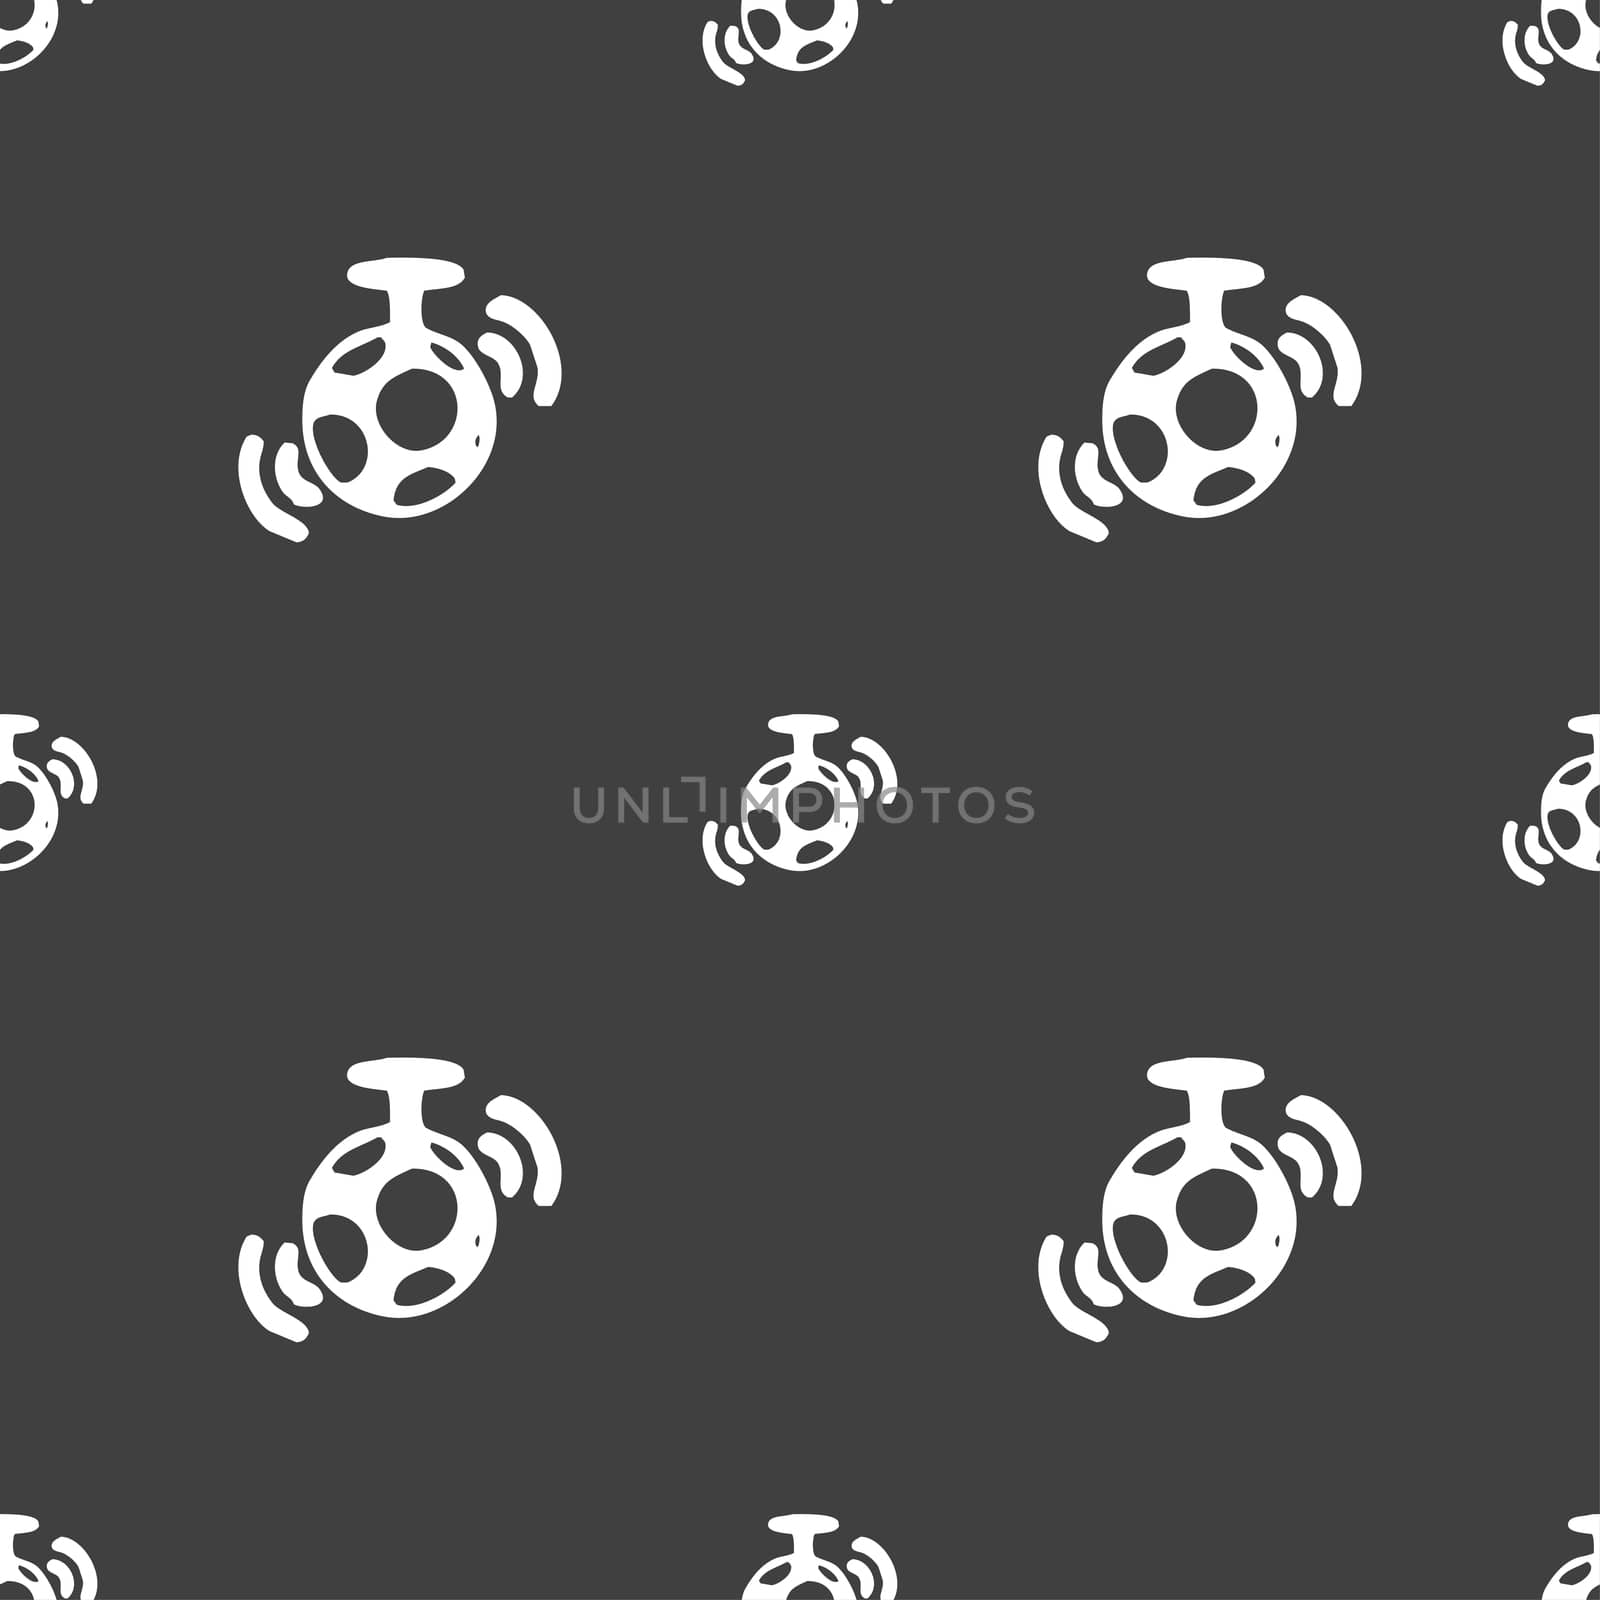 mirror ball disco icon sign. Seamless pattern on a gray background. illustration